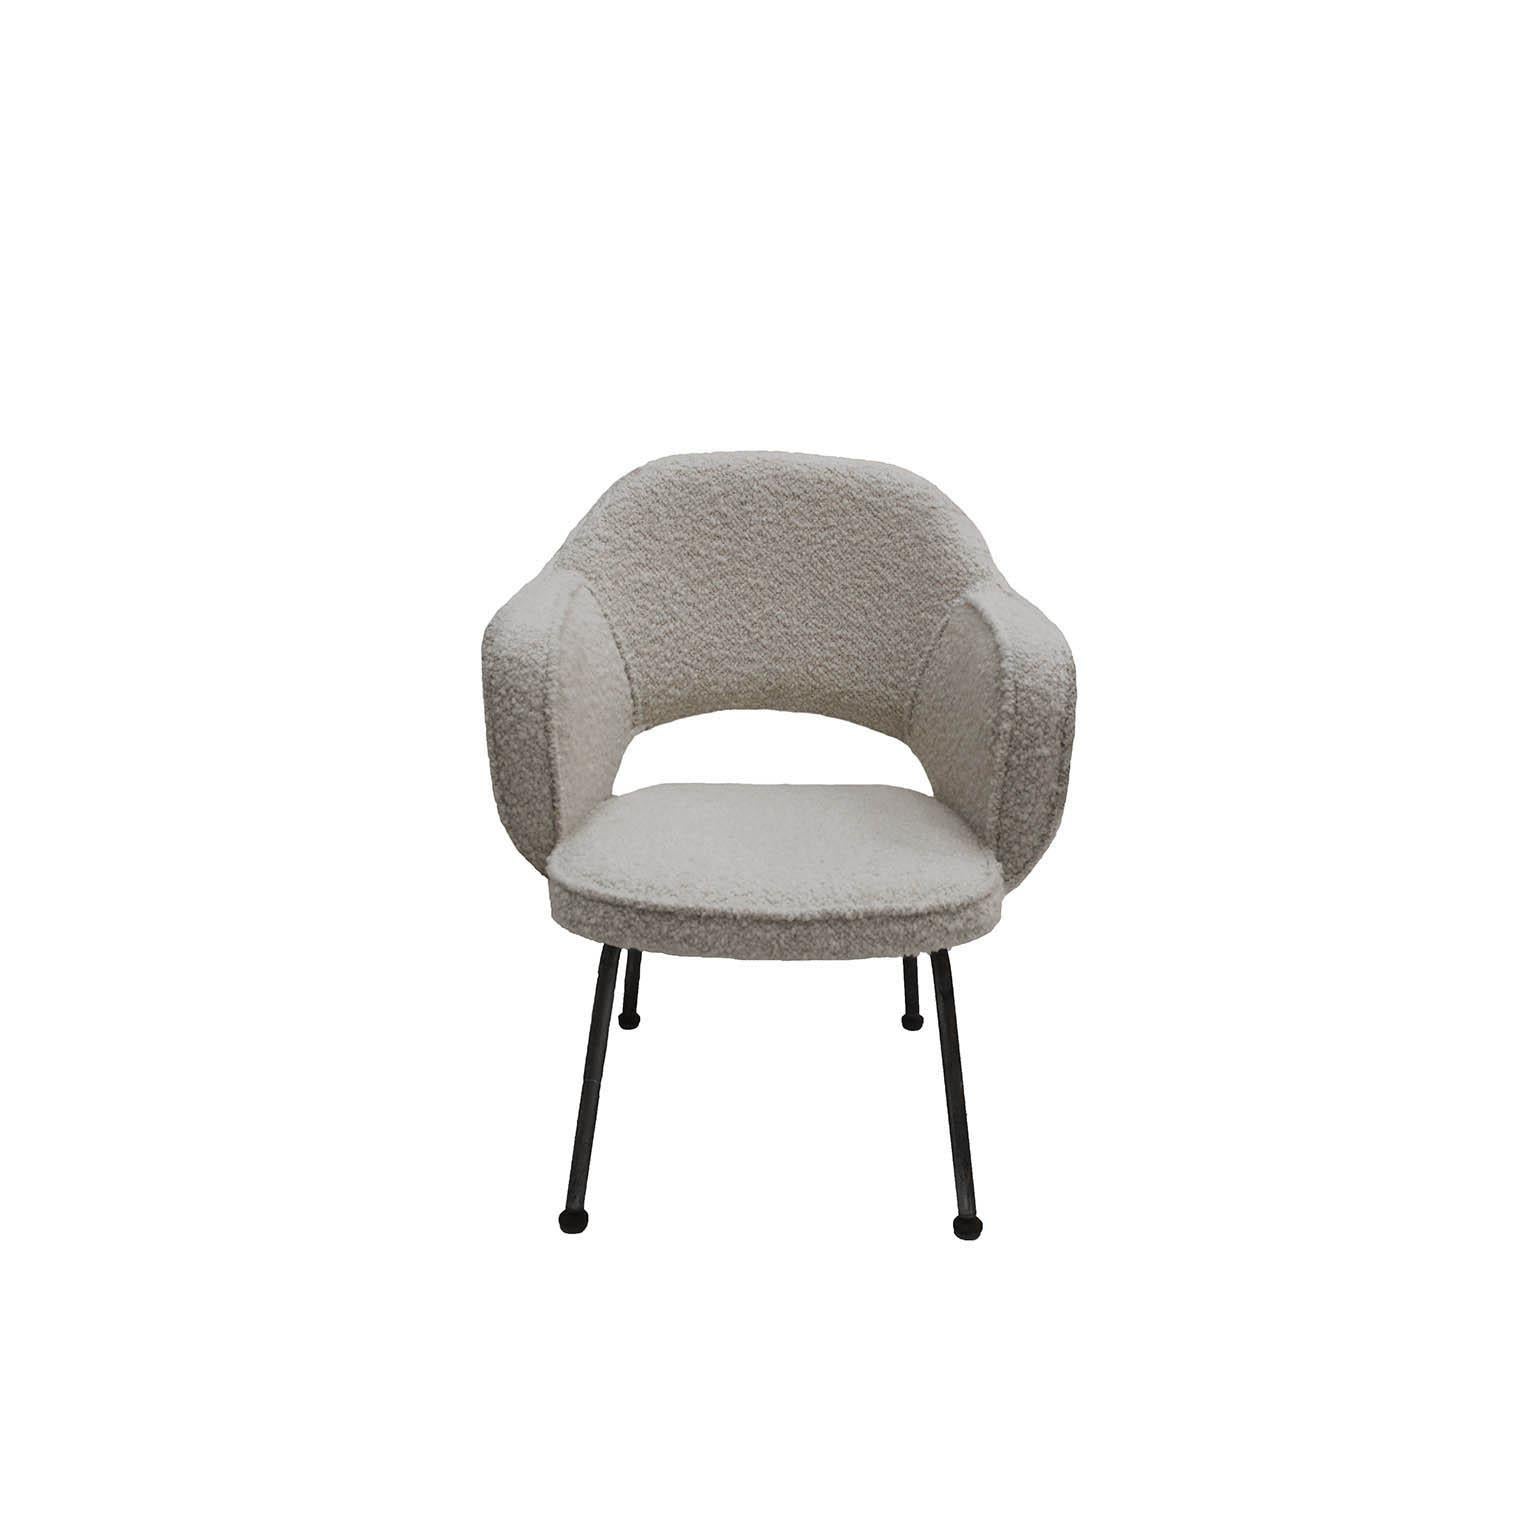 Set of 6 chairs mod. Executive designed by Eero Saarinen for Knoll Composed of a tubular metal structure and reupholstered in bouclé wool fabric.

Measurements: W 65 x D 60 x H 45/77 cm

Every item LA Studio offers is checked by our team of 10